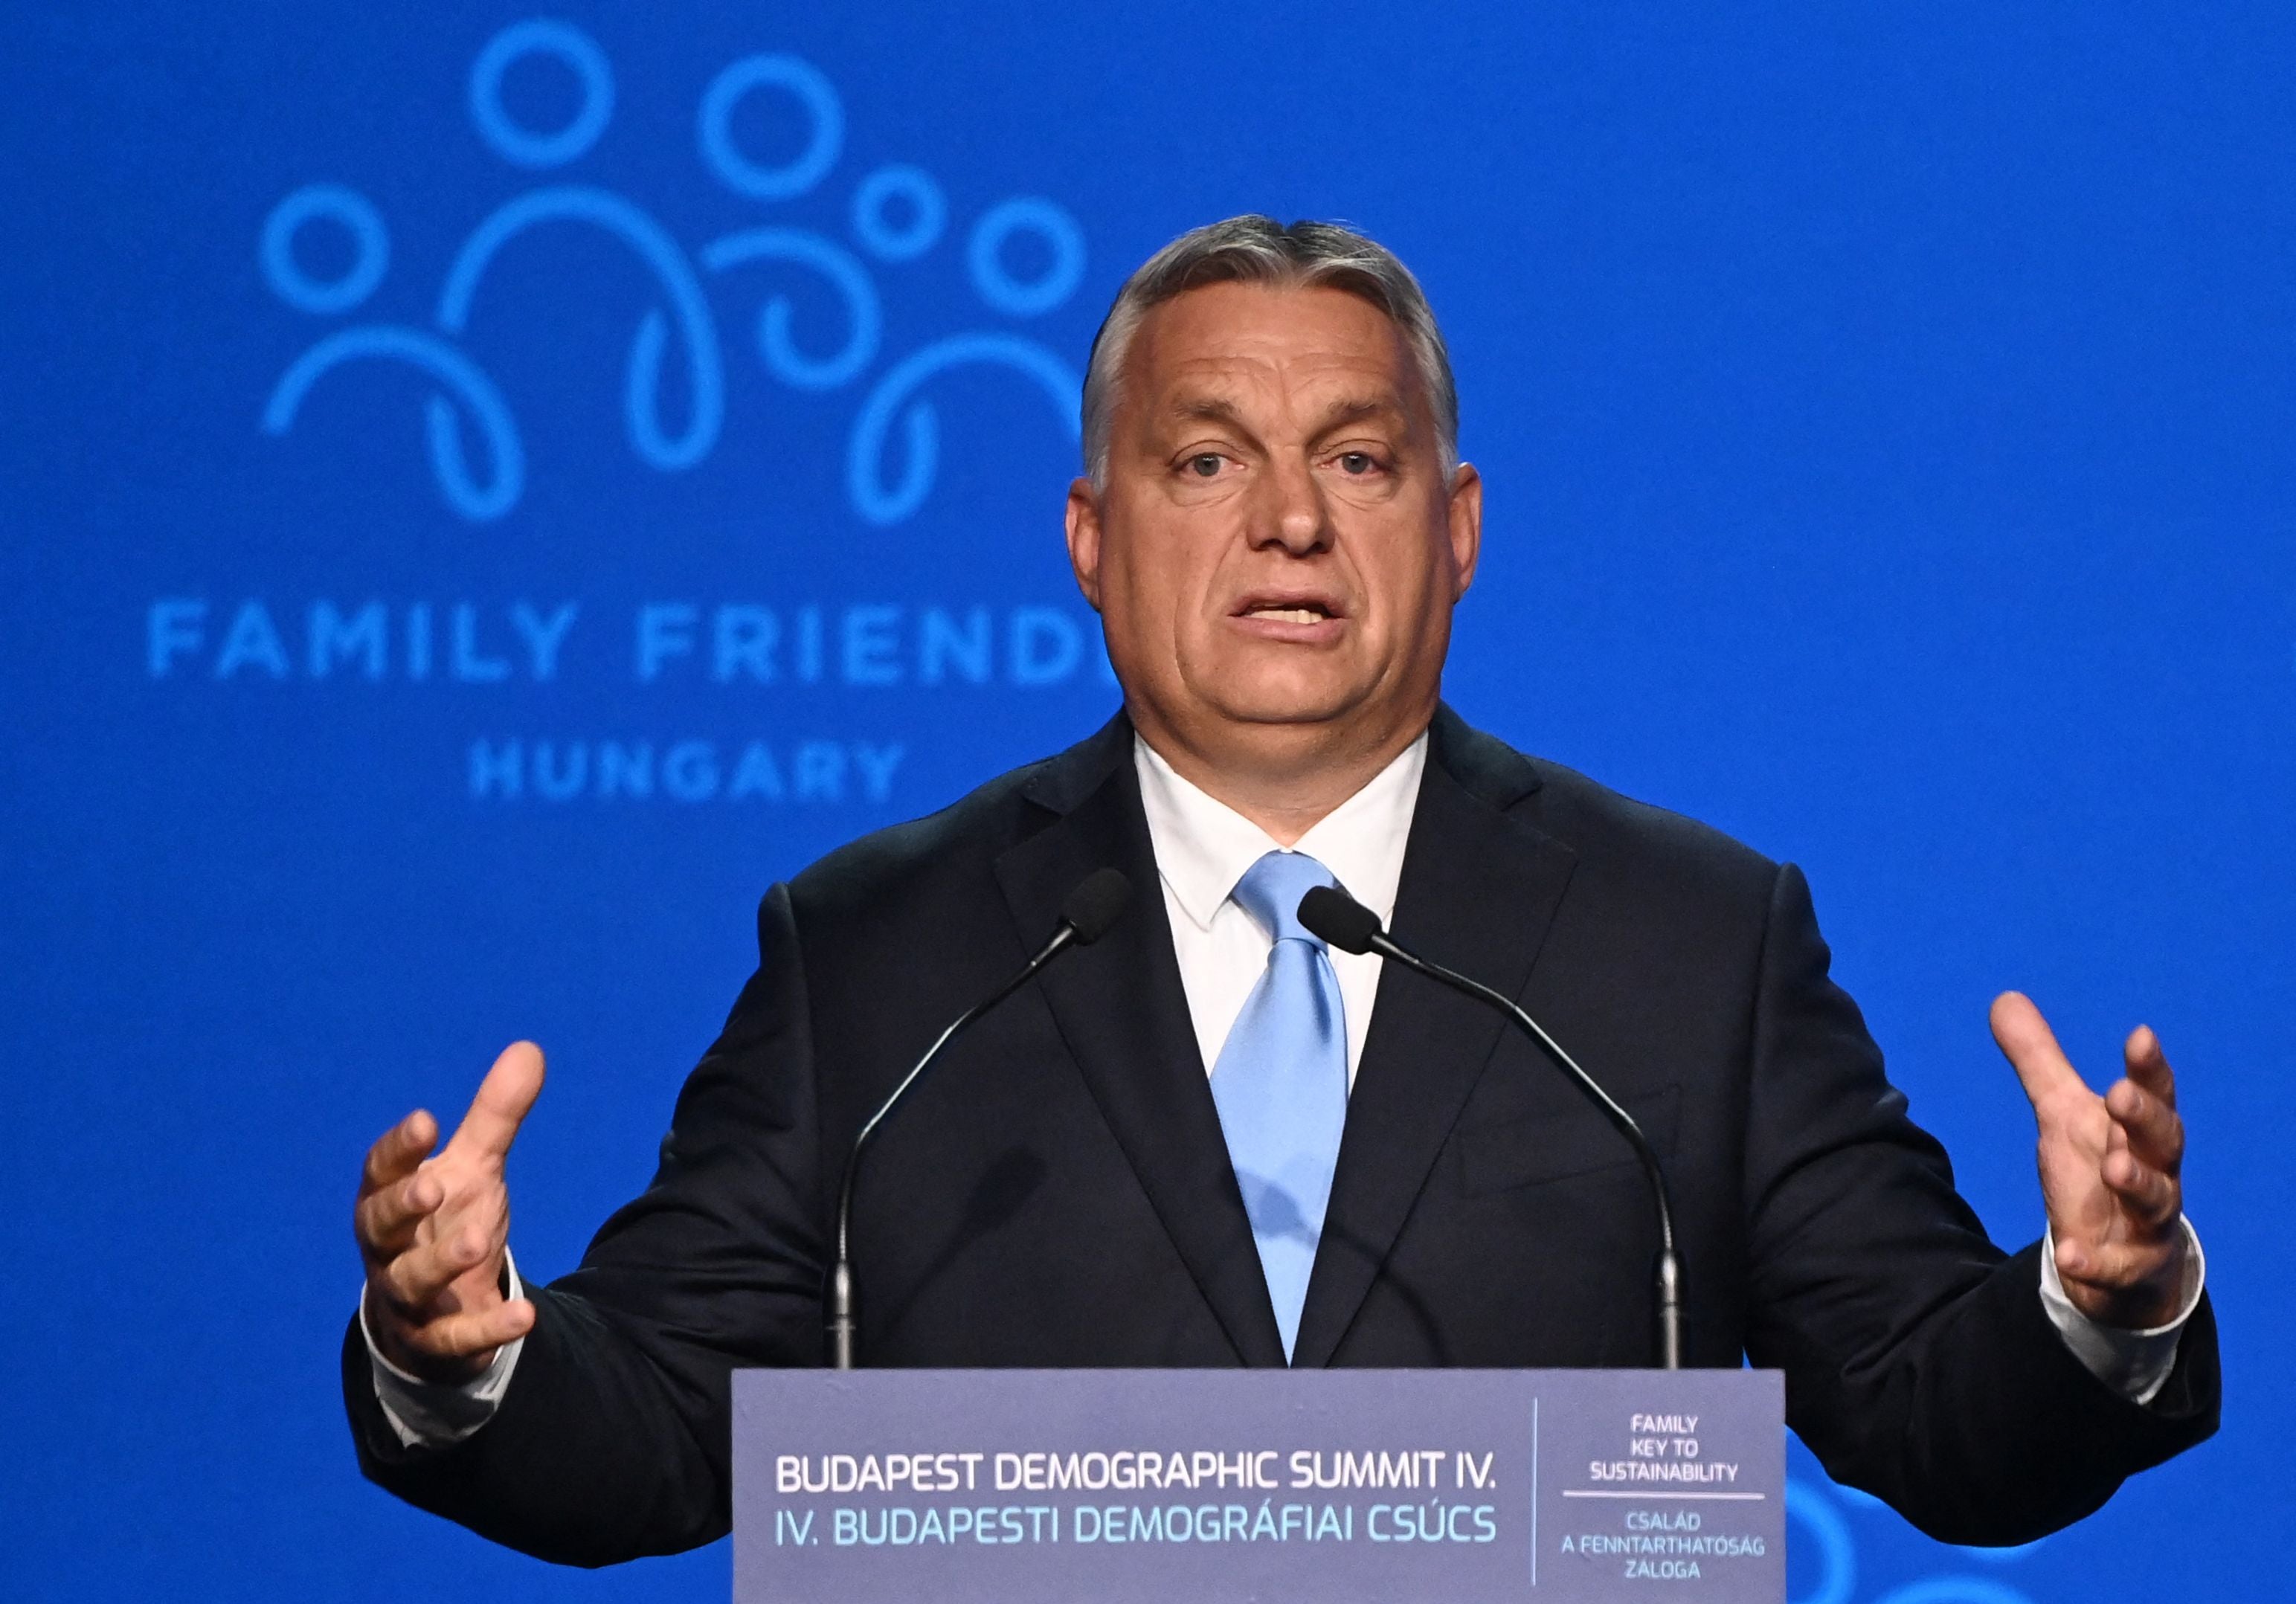 Hungary’s PM Viktor Orban is good at turning EU aggression to political advantage